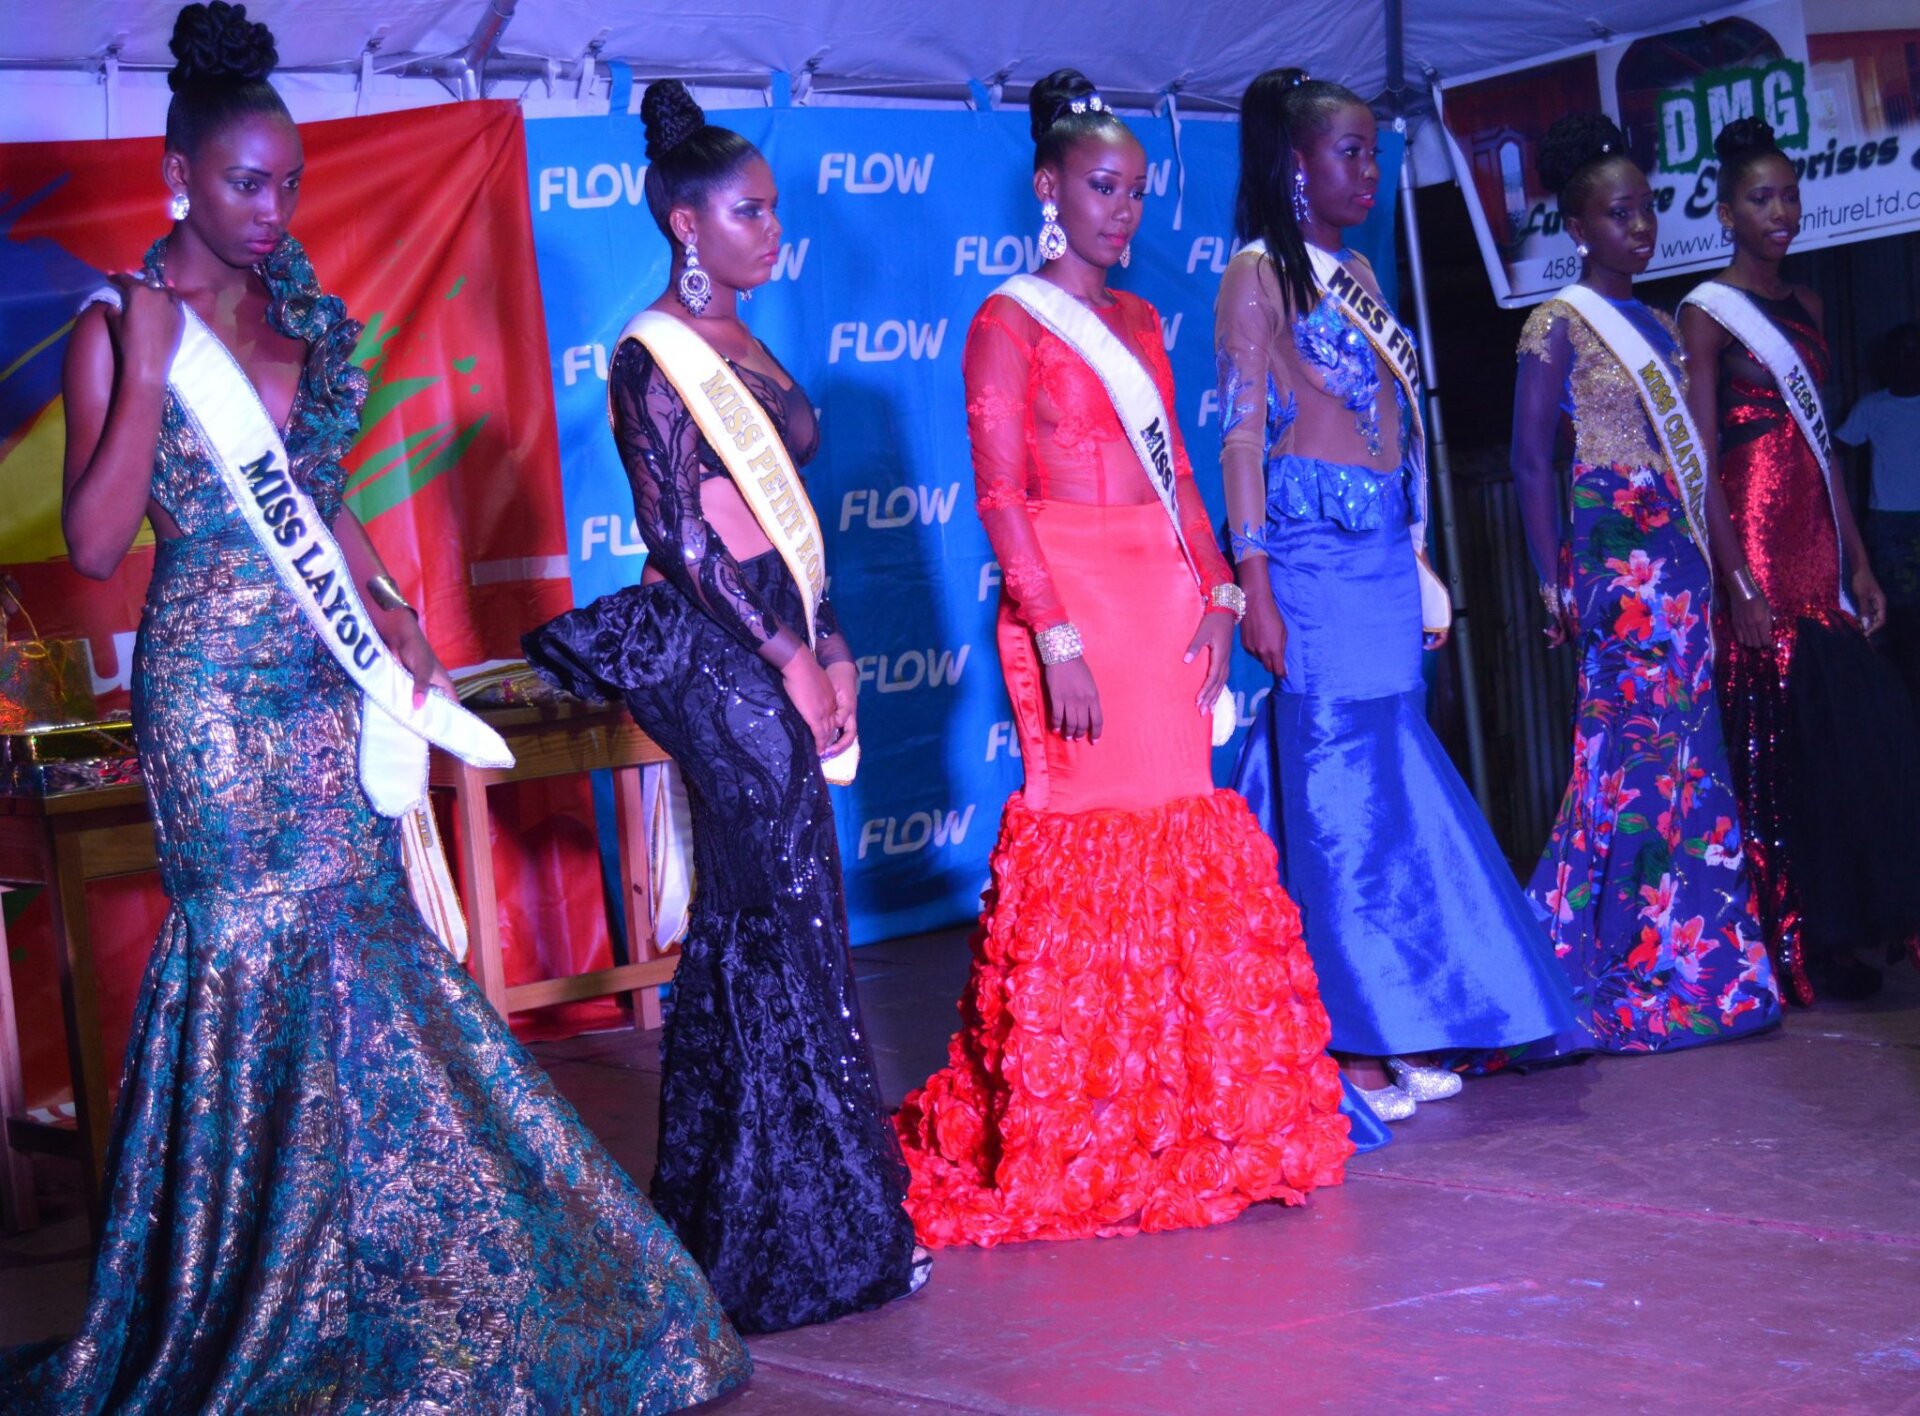 Contestants in the Miss Leeward pageant in Evening wear. (Photo: Jules Anthony)